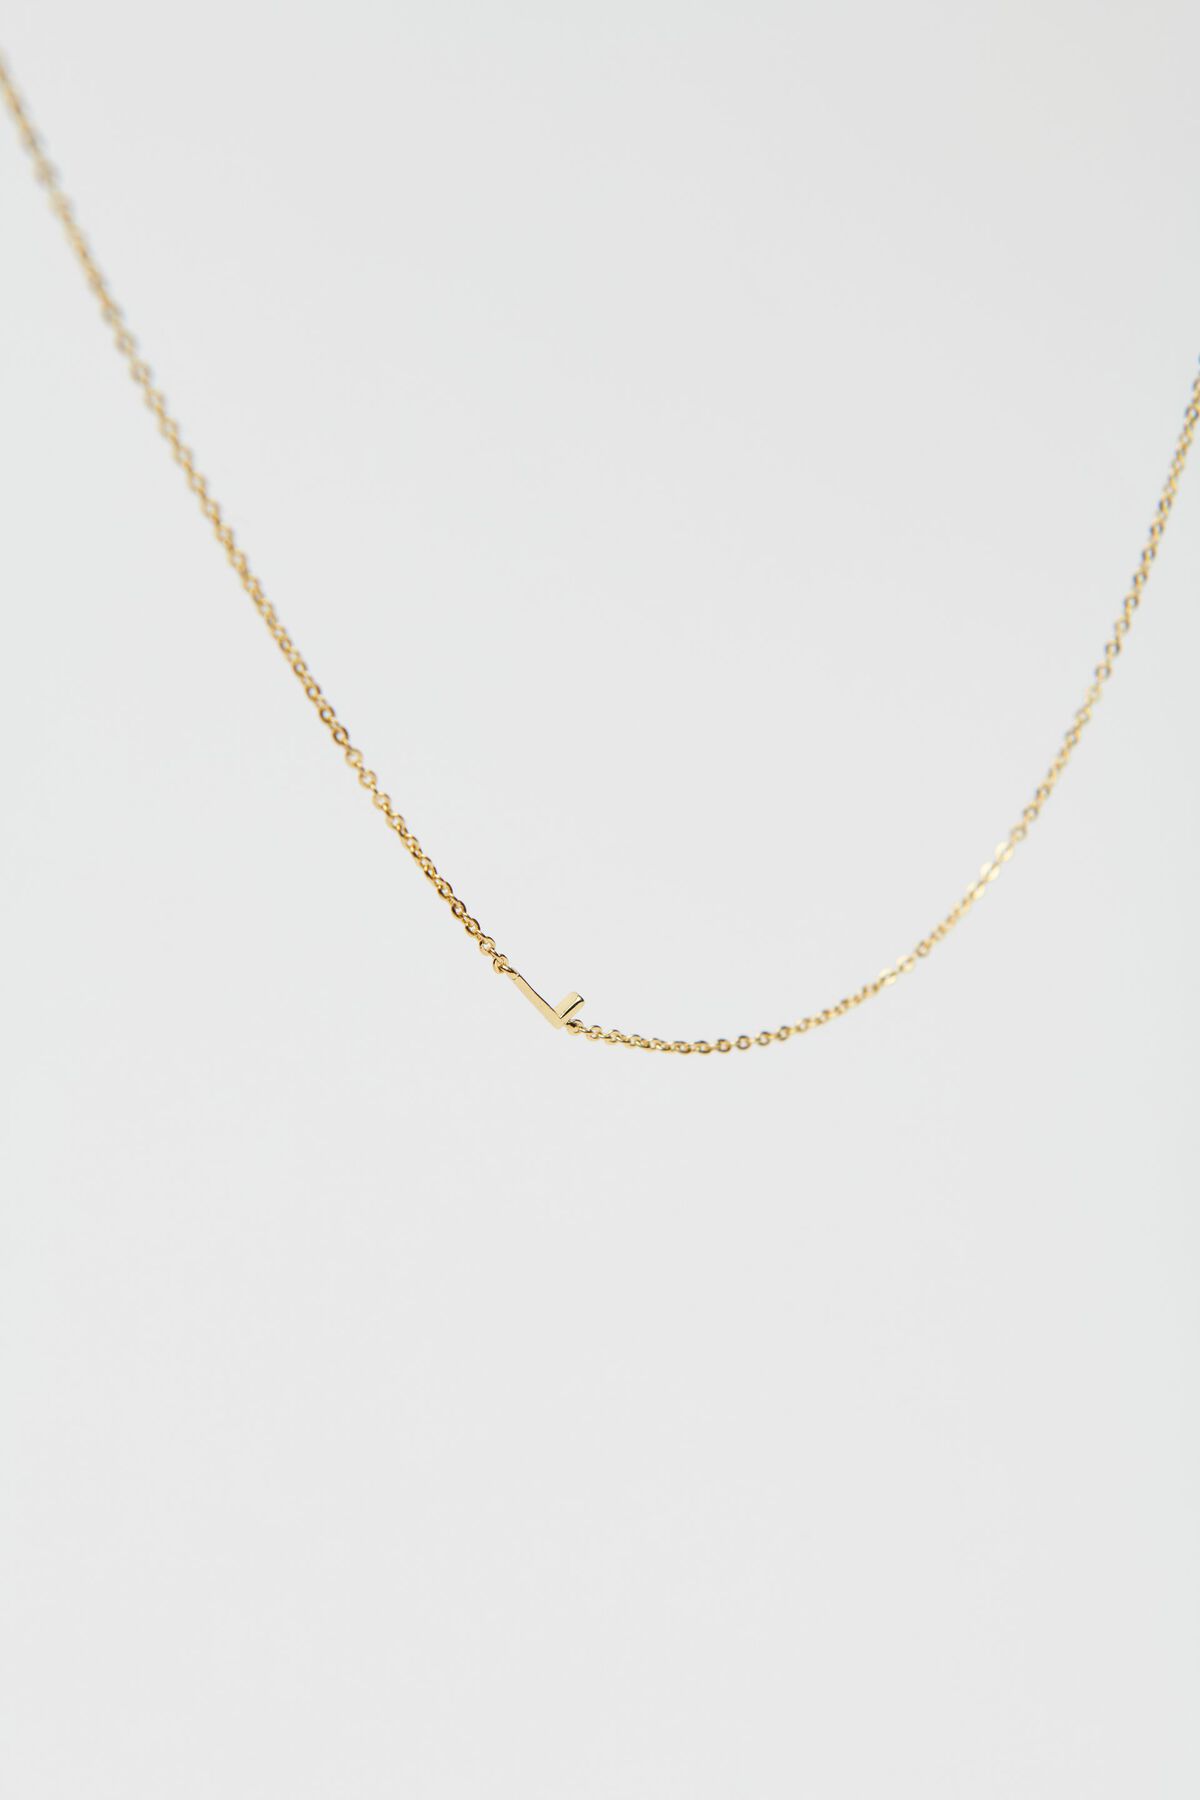 Garage 14K Gold Plated Initial Necklace. 2